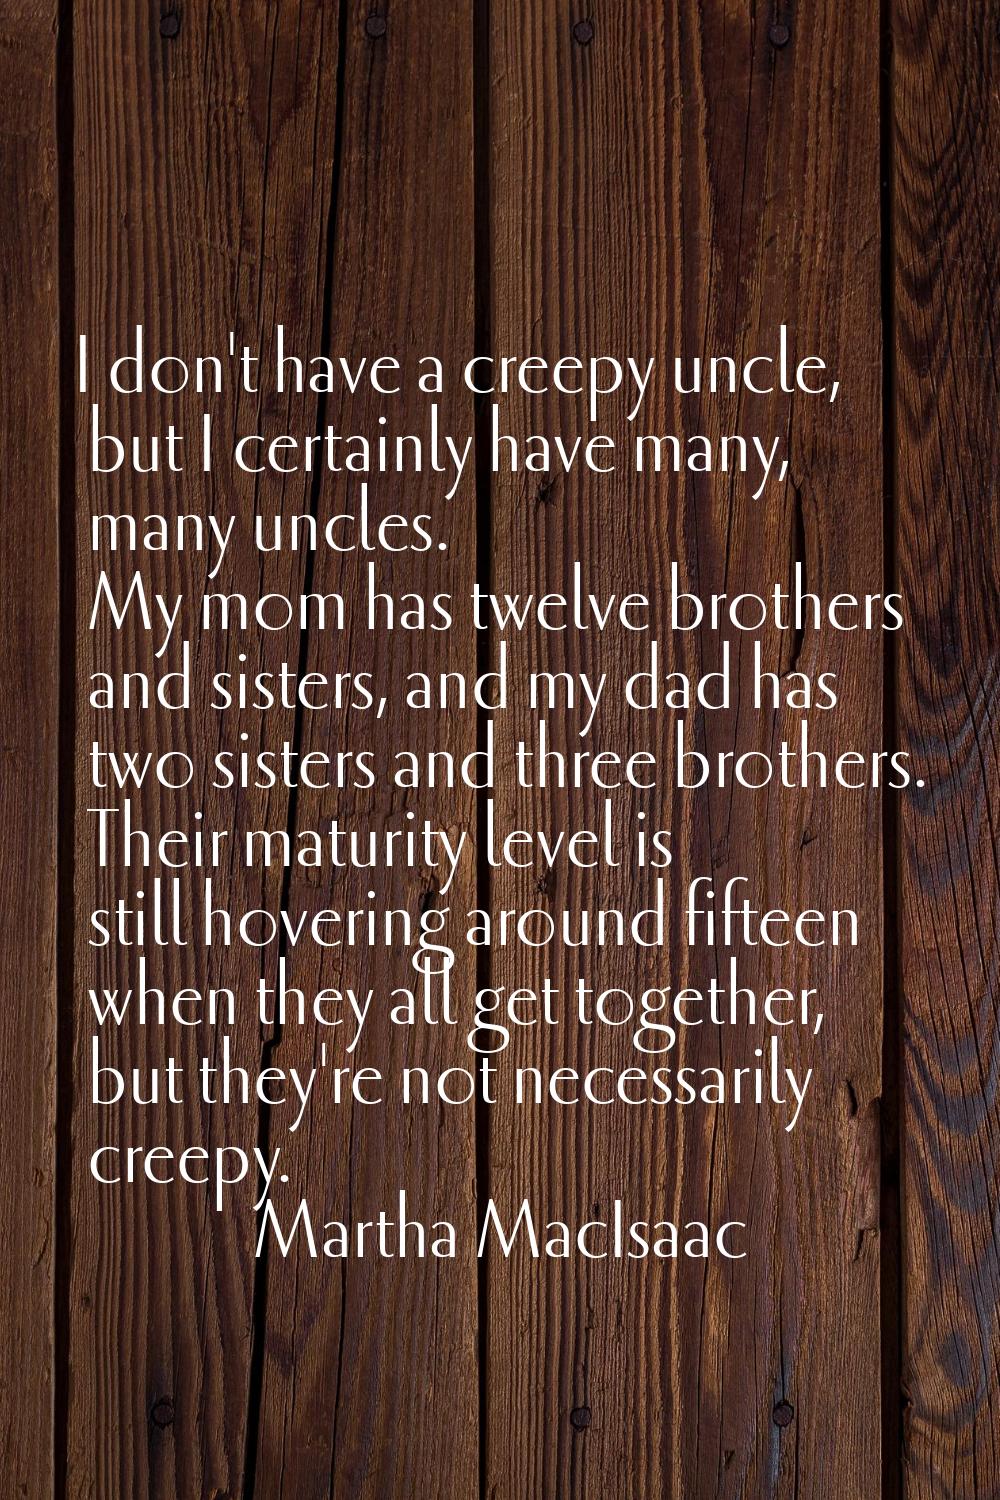 I don't have a creepy uncle, but I certainly have many, many uncles. My mom has twelve brothers and